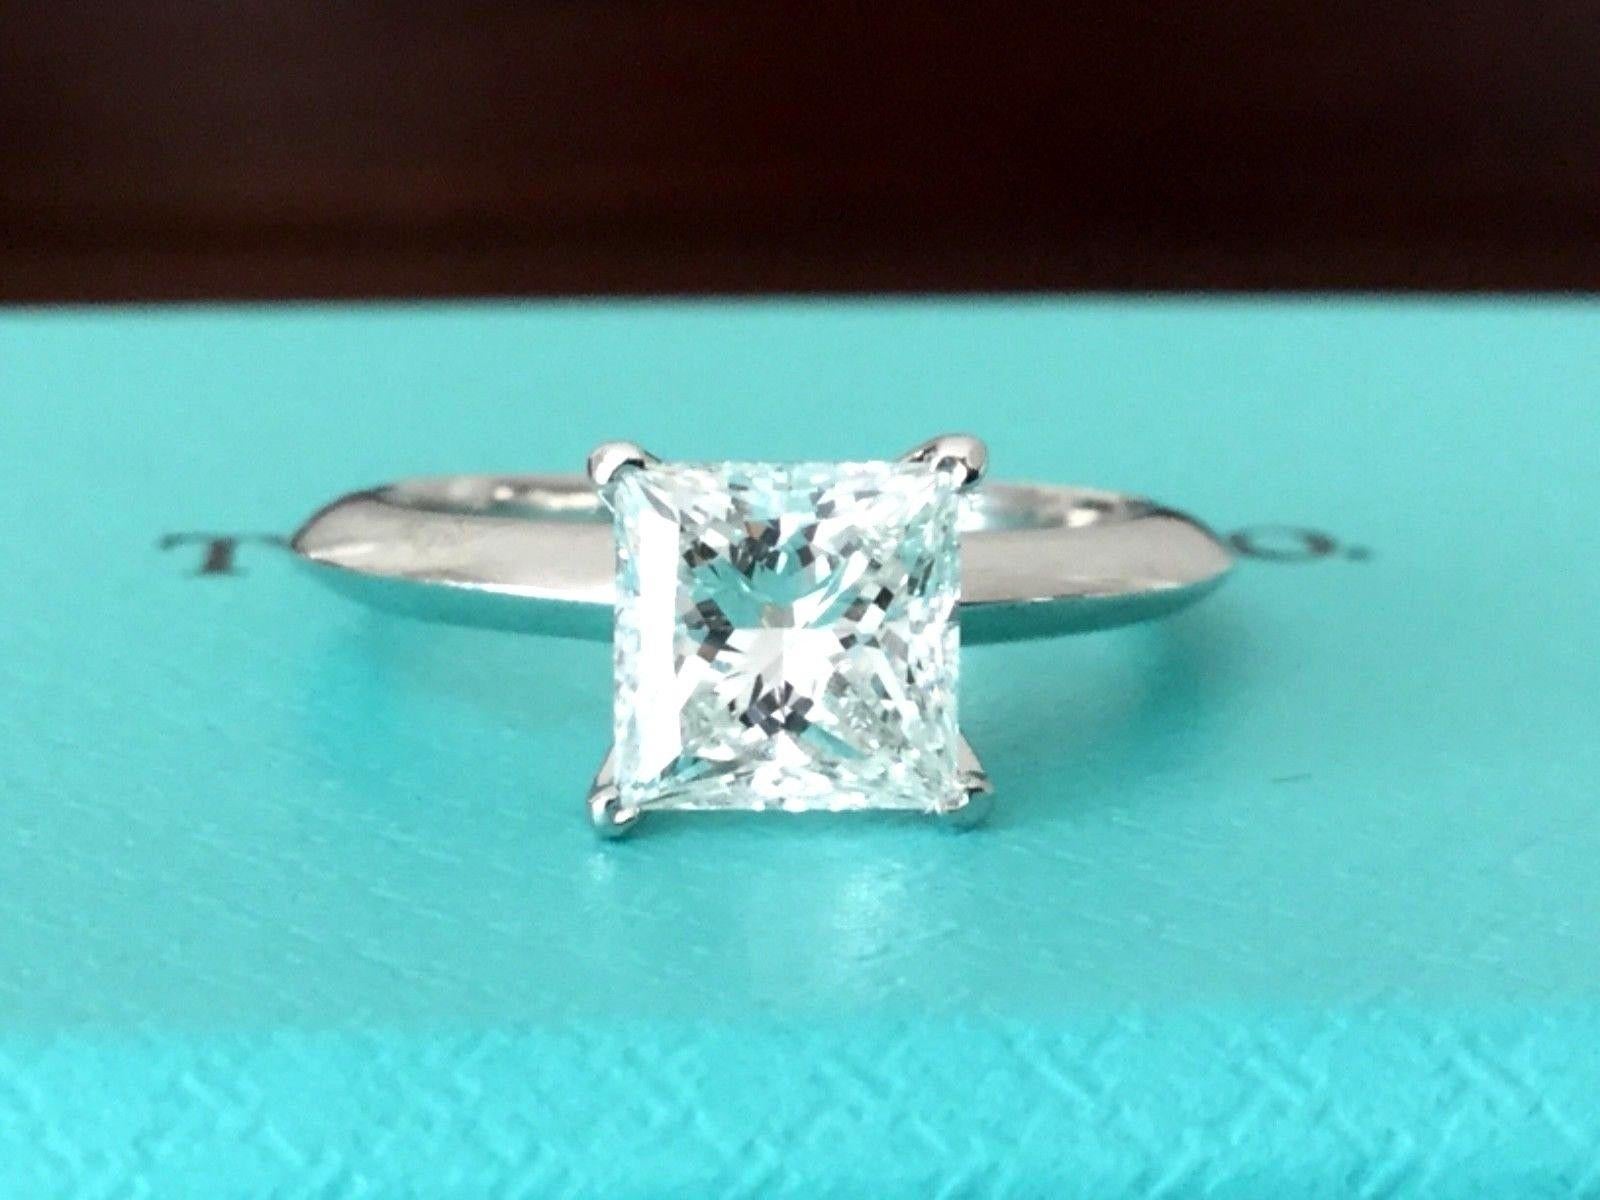 For your consideration is a Tiffany & Co Princess cut, natural diamond solitaire that is 1.07 carats, F in Color and VS1 in Clarity and EXCELLENT cut and polish and very good symmetry making it a very rare and desirable diamond.  It is set in the